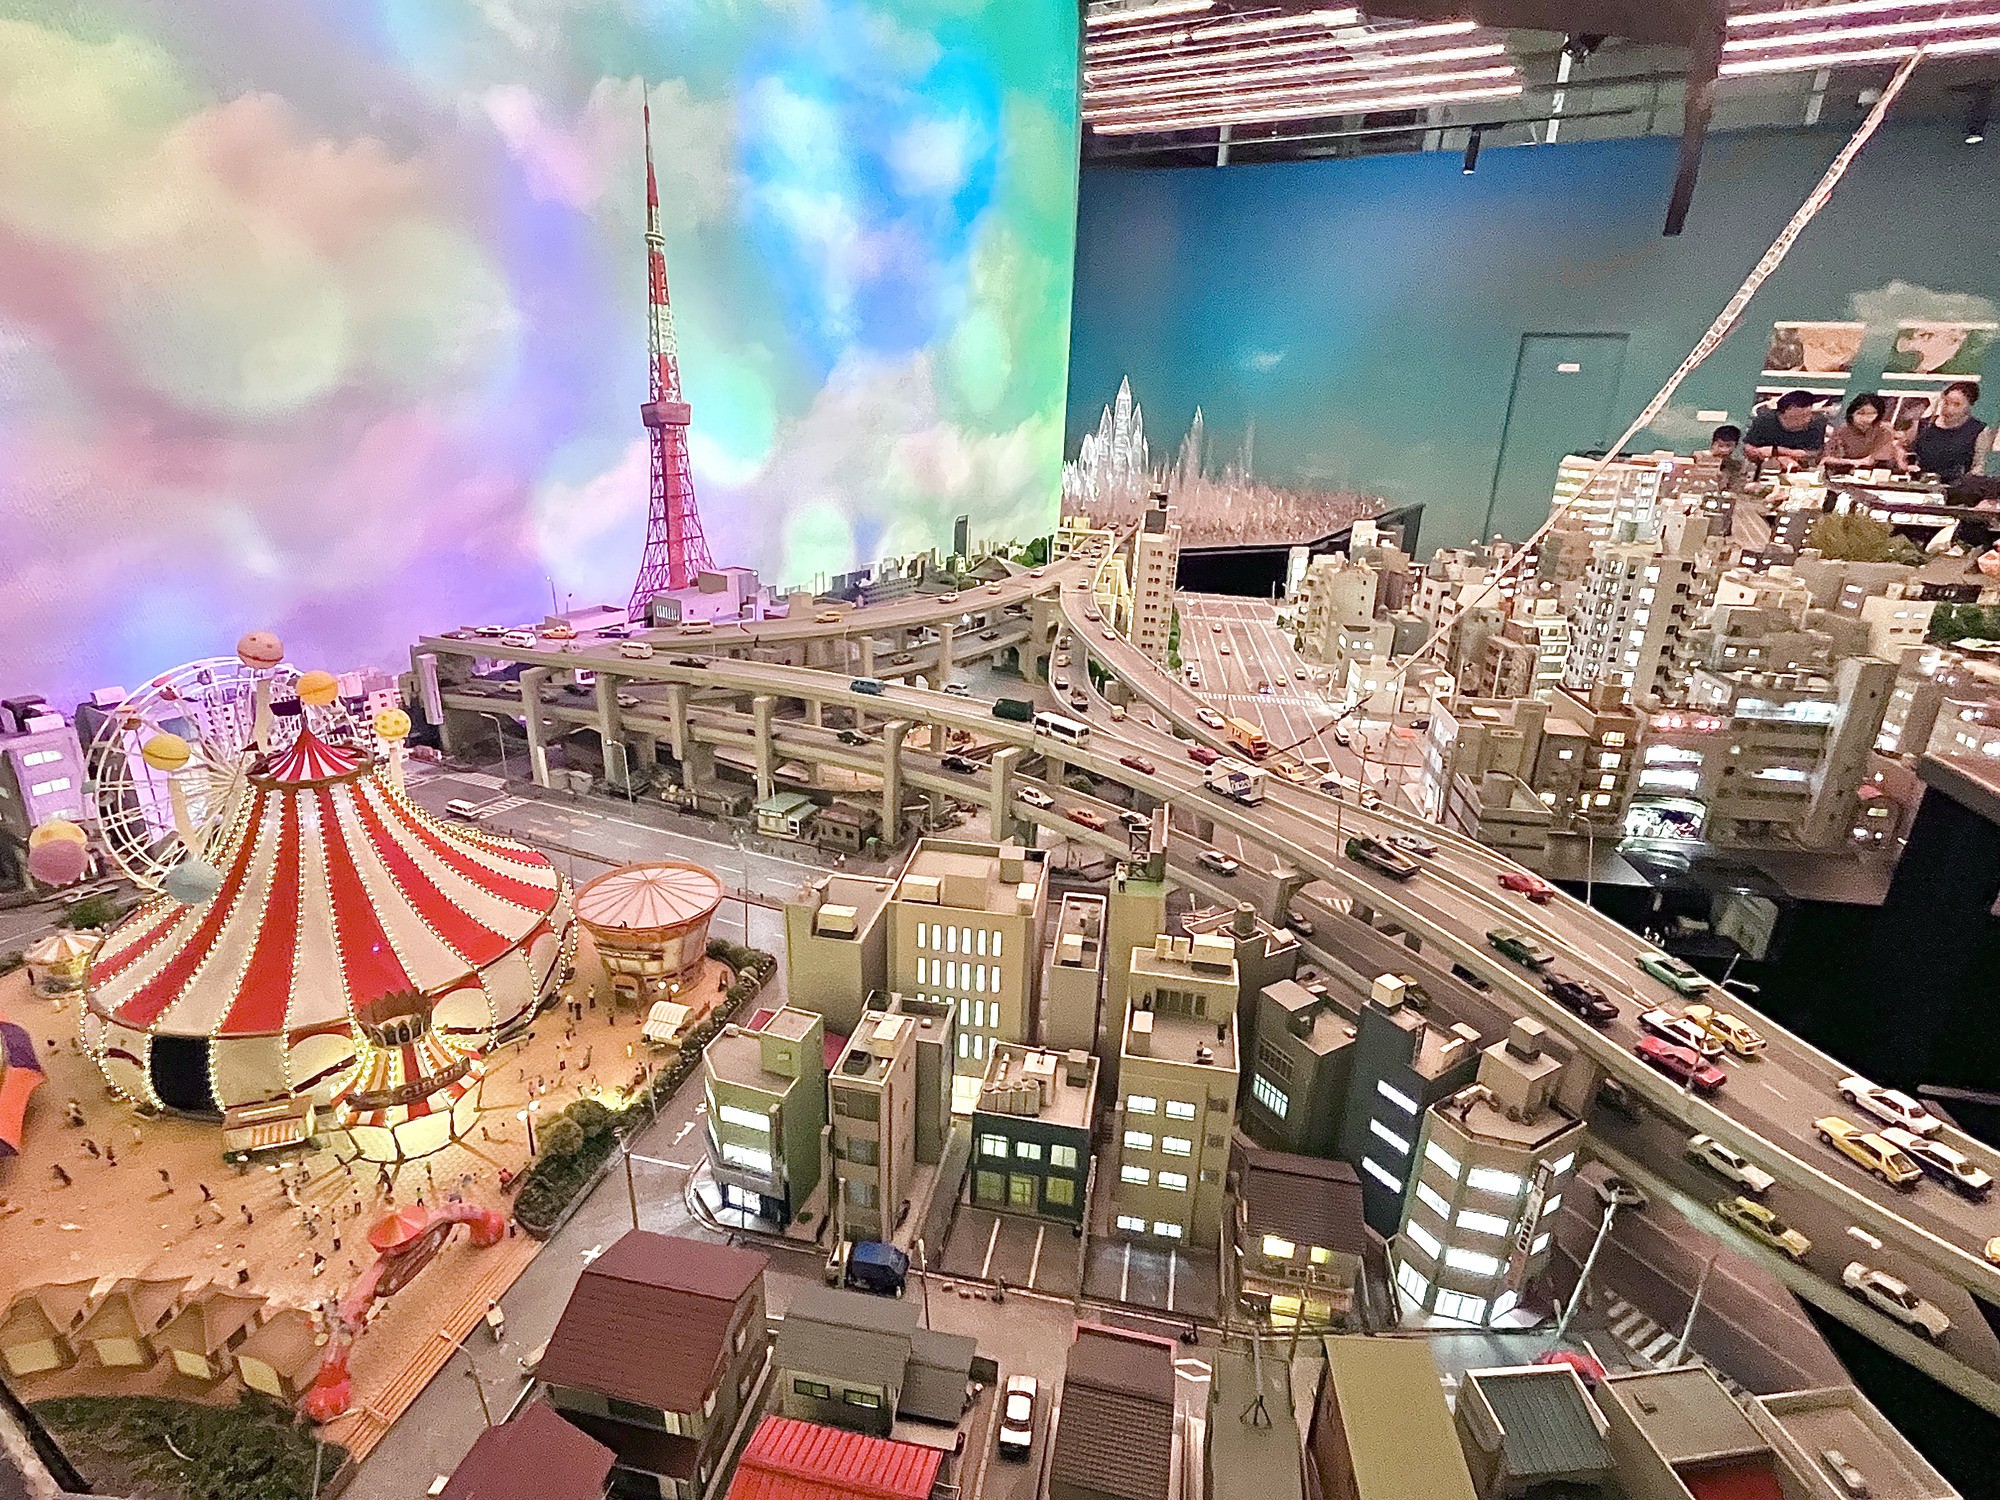 SMALL WORLDS Miniature Museum, a popular spot near Odaiba, Tokyo, has been renovated! Introducing the facility + how to enjoy